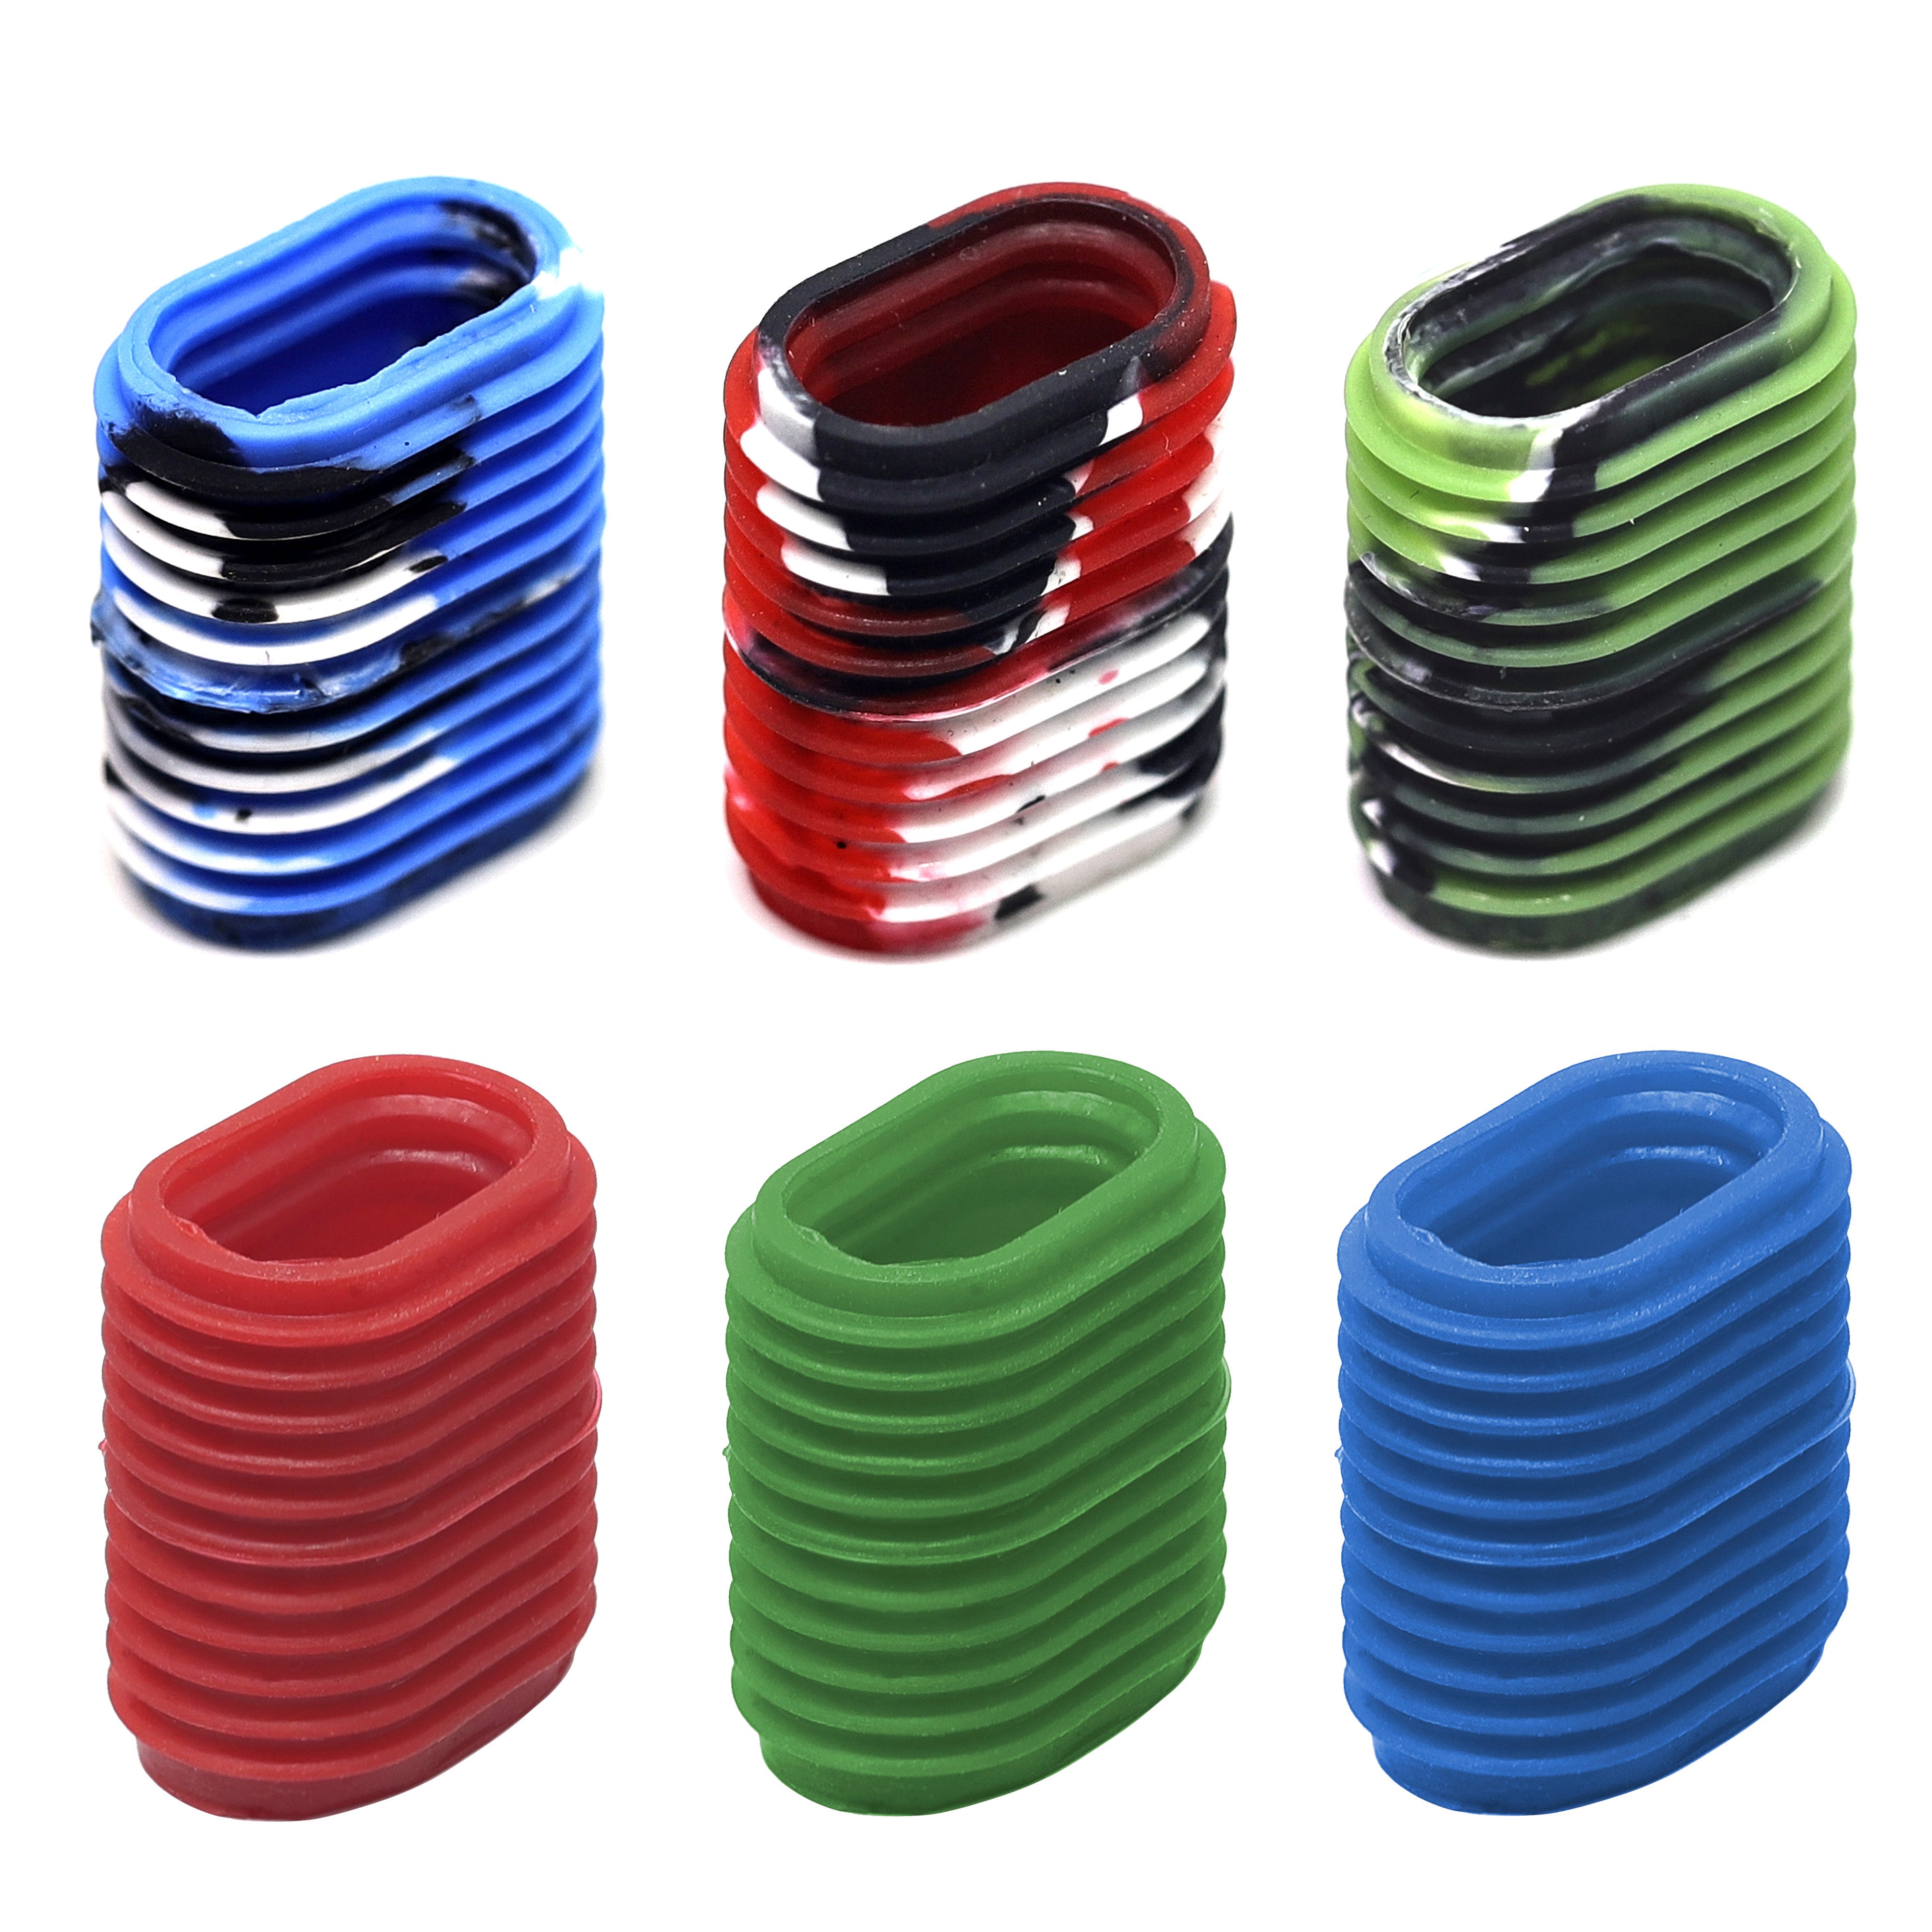 Rubber Reel Handle Cover Knobs